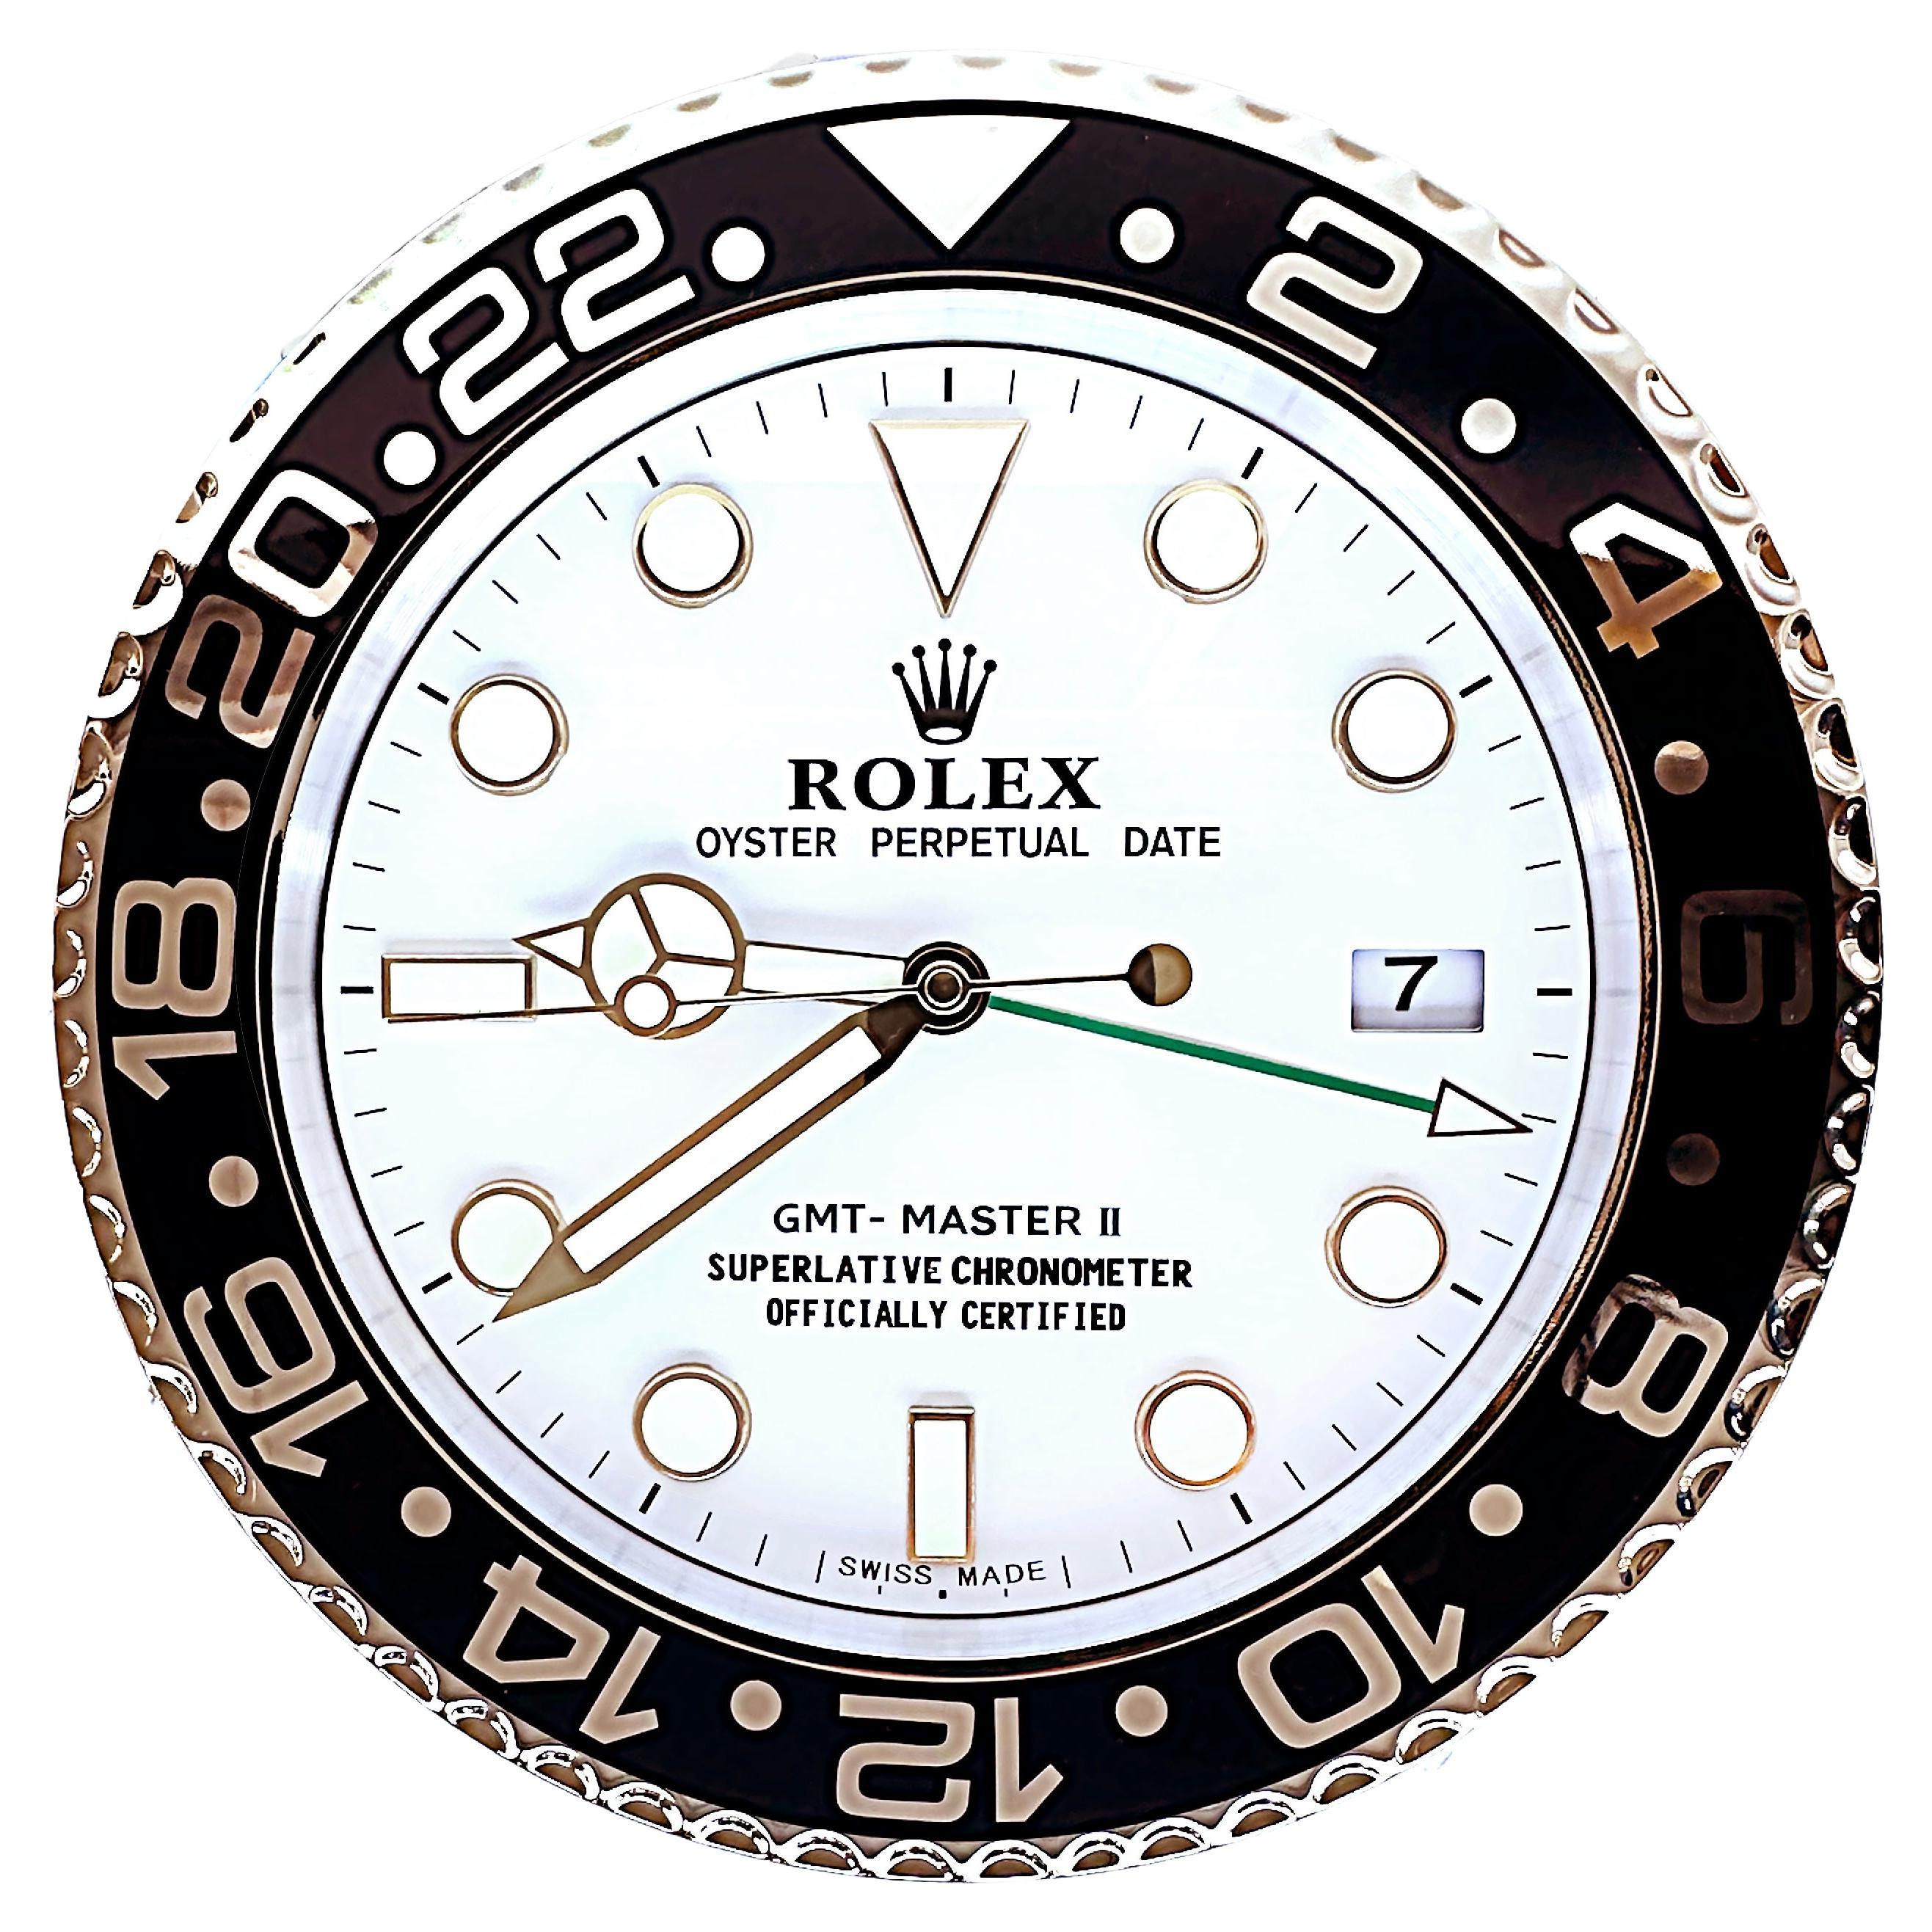 New Dealer's Oyster Perpetual Advertising Rolex Wall Clock, Battery-Powered  For Sale at 1stDibs | rolex clock wall, rolex wall clock amazon, rolex wall  clock for sale